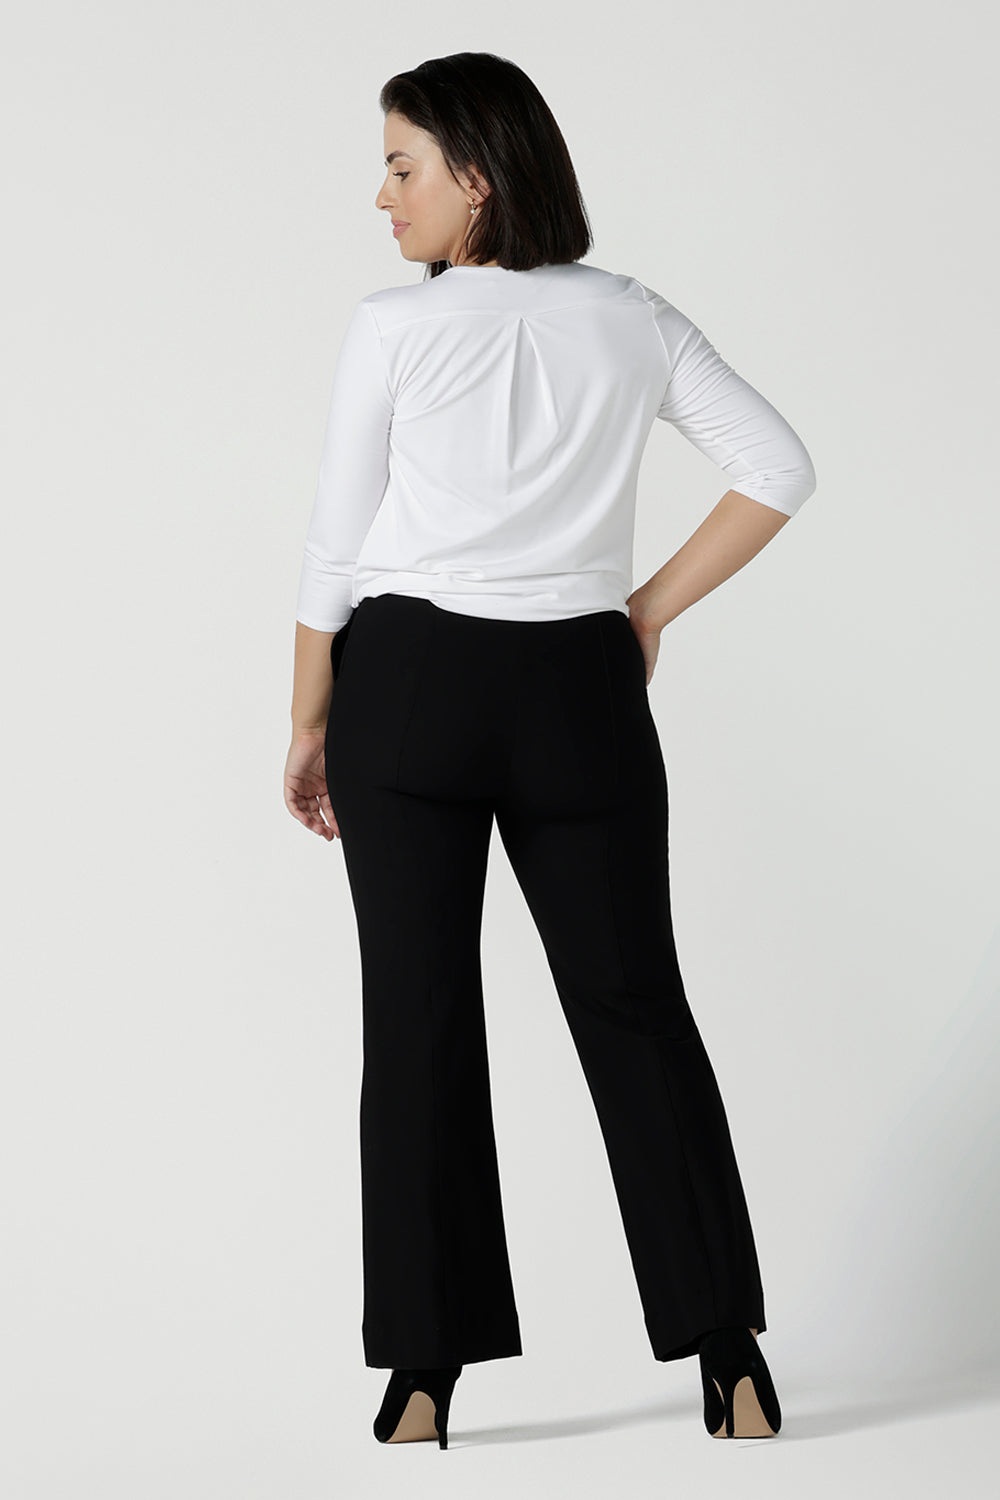 Back view of a size 10 woman wears the Brett Pant in black, a tailored work pant with bootleg style leg opening. Great for petite to tall women. Made in Australia pants size 8 - 24.